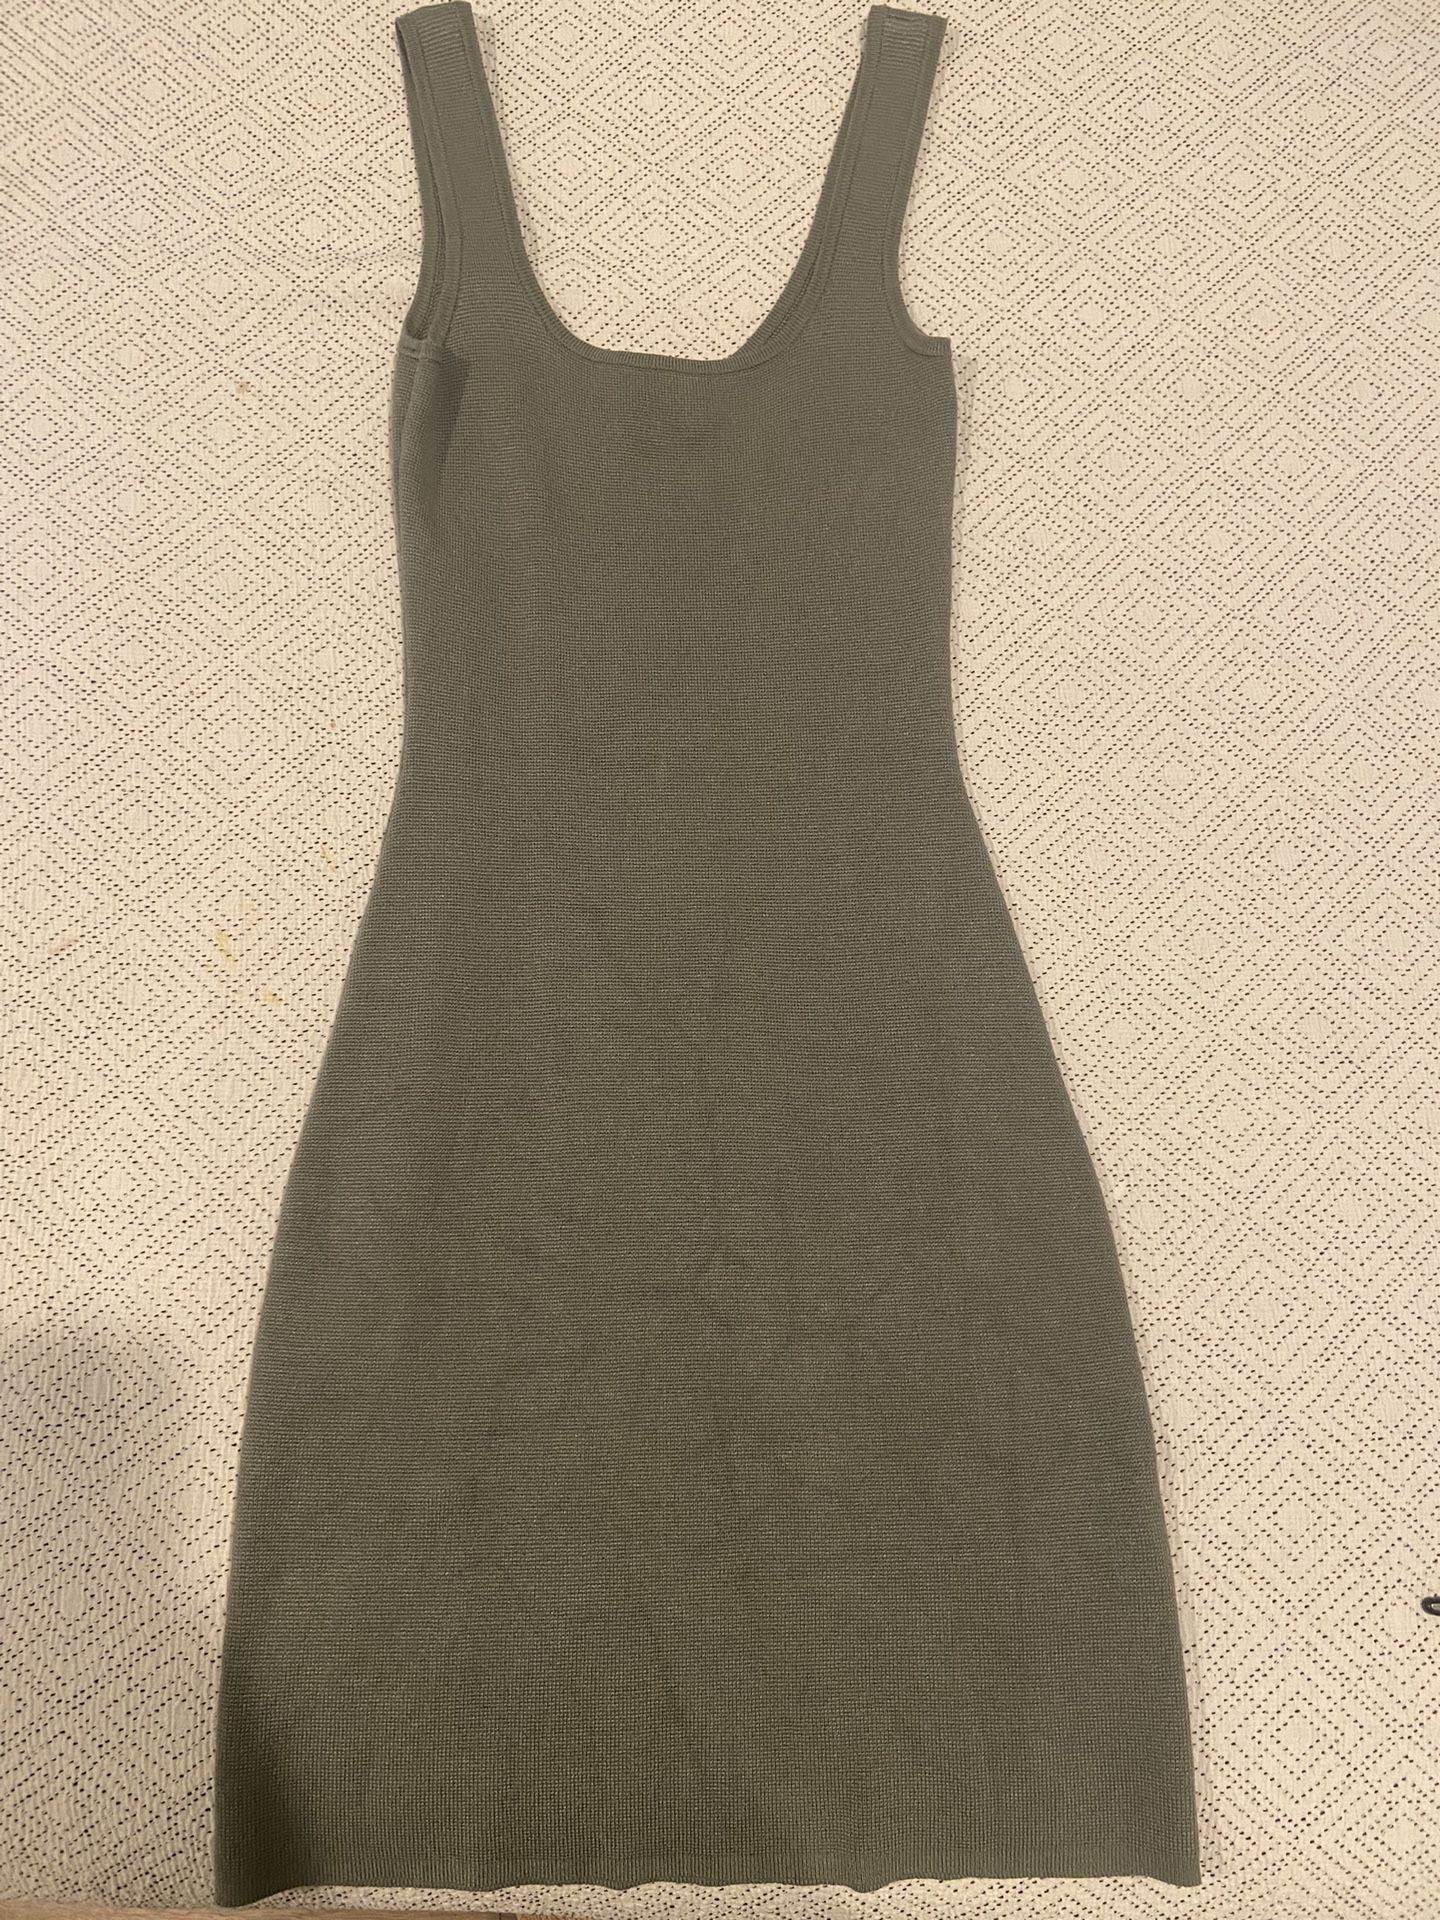 Abercrombie and Fitch Bodycon Dress